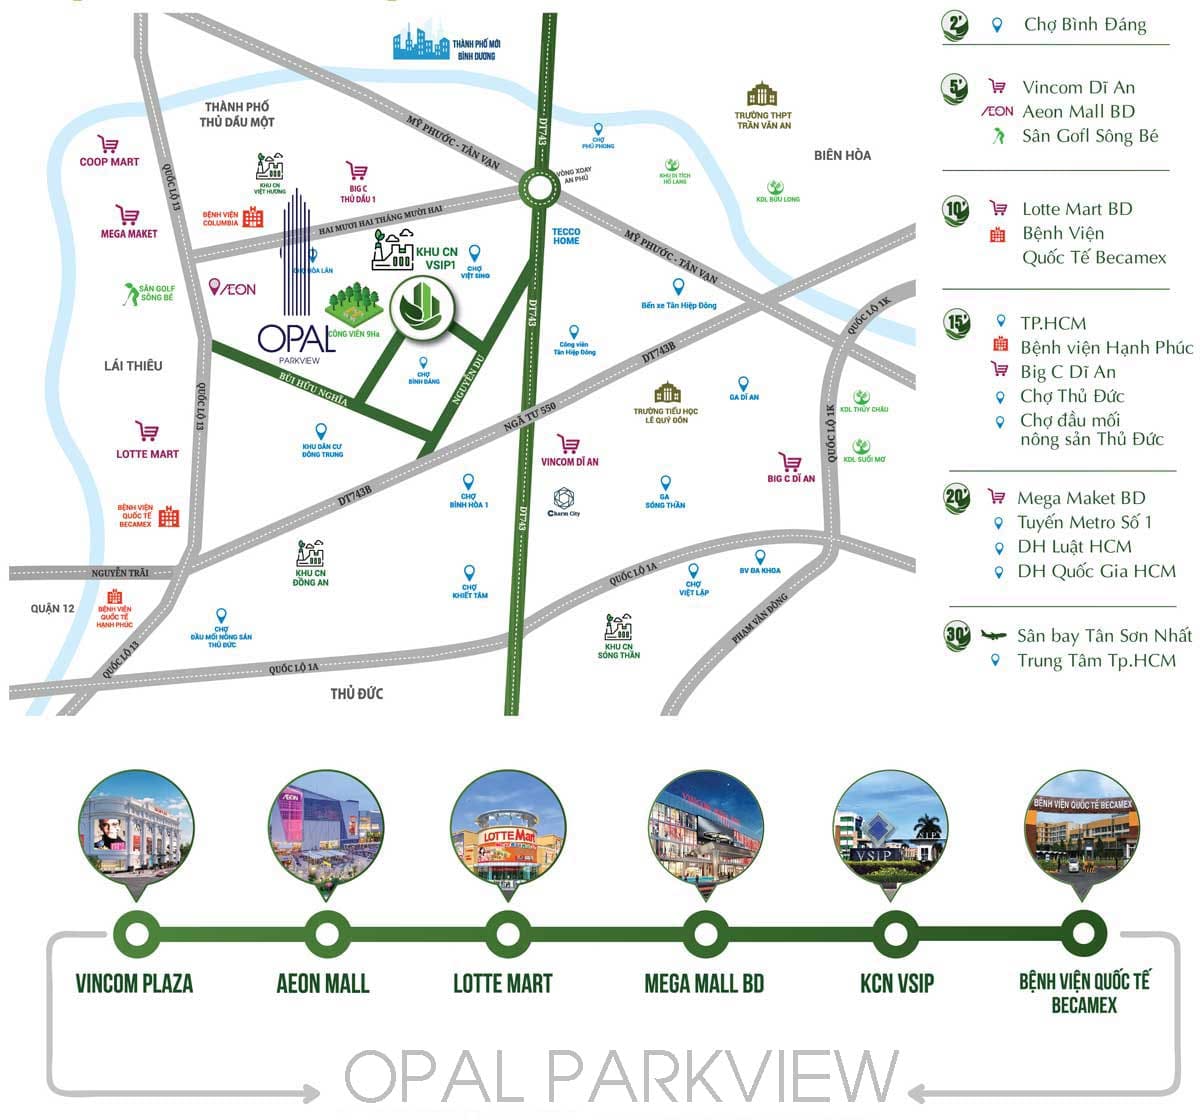 OPAL PARKVIEW